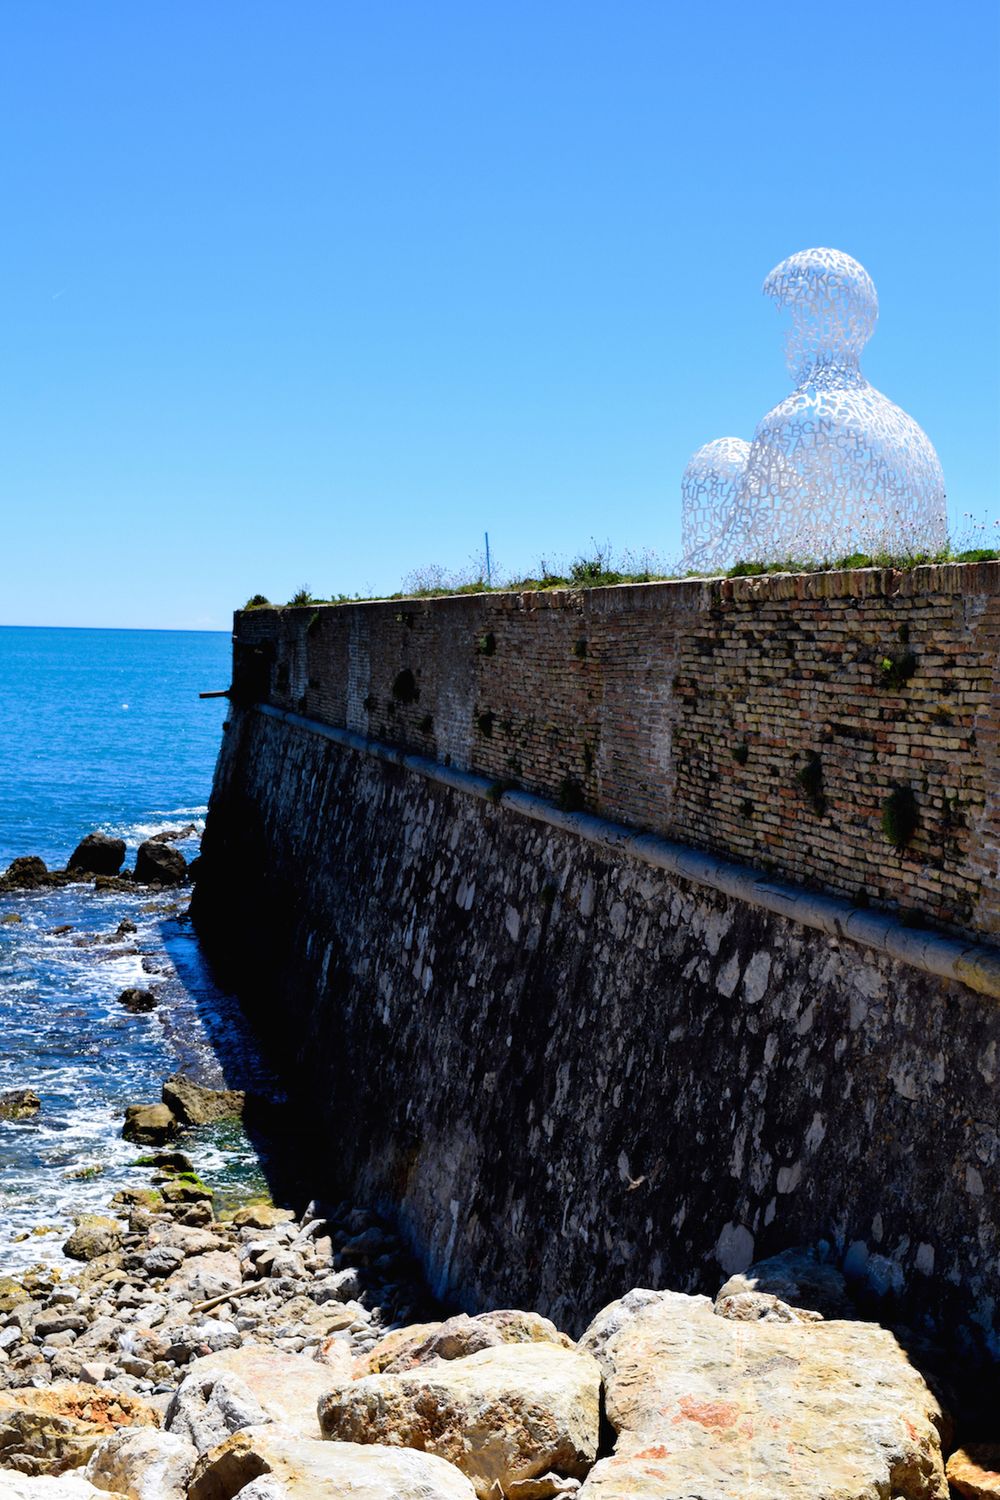 Le Nomade sculpture, Antibes, France